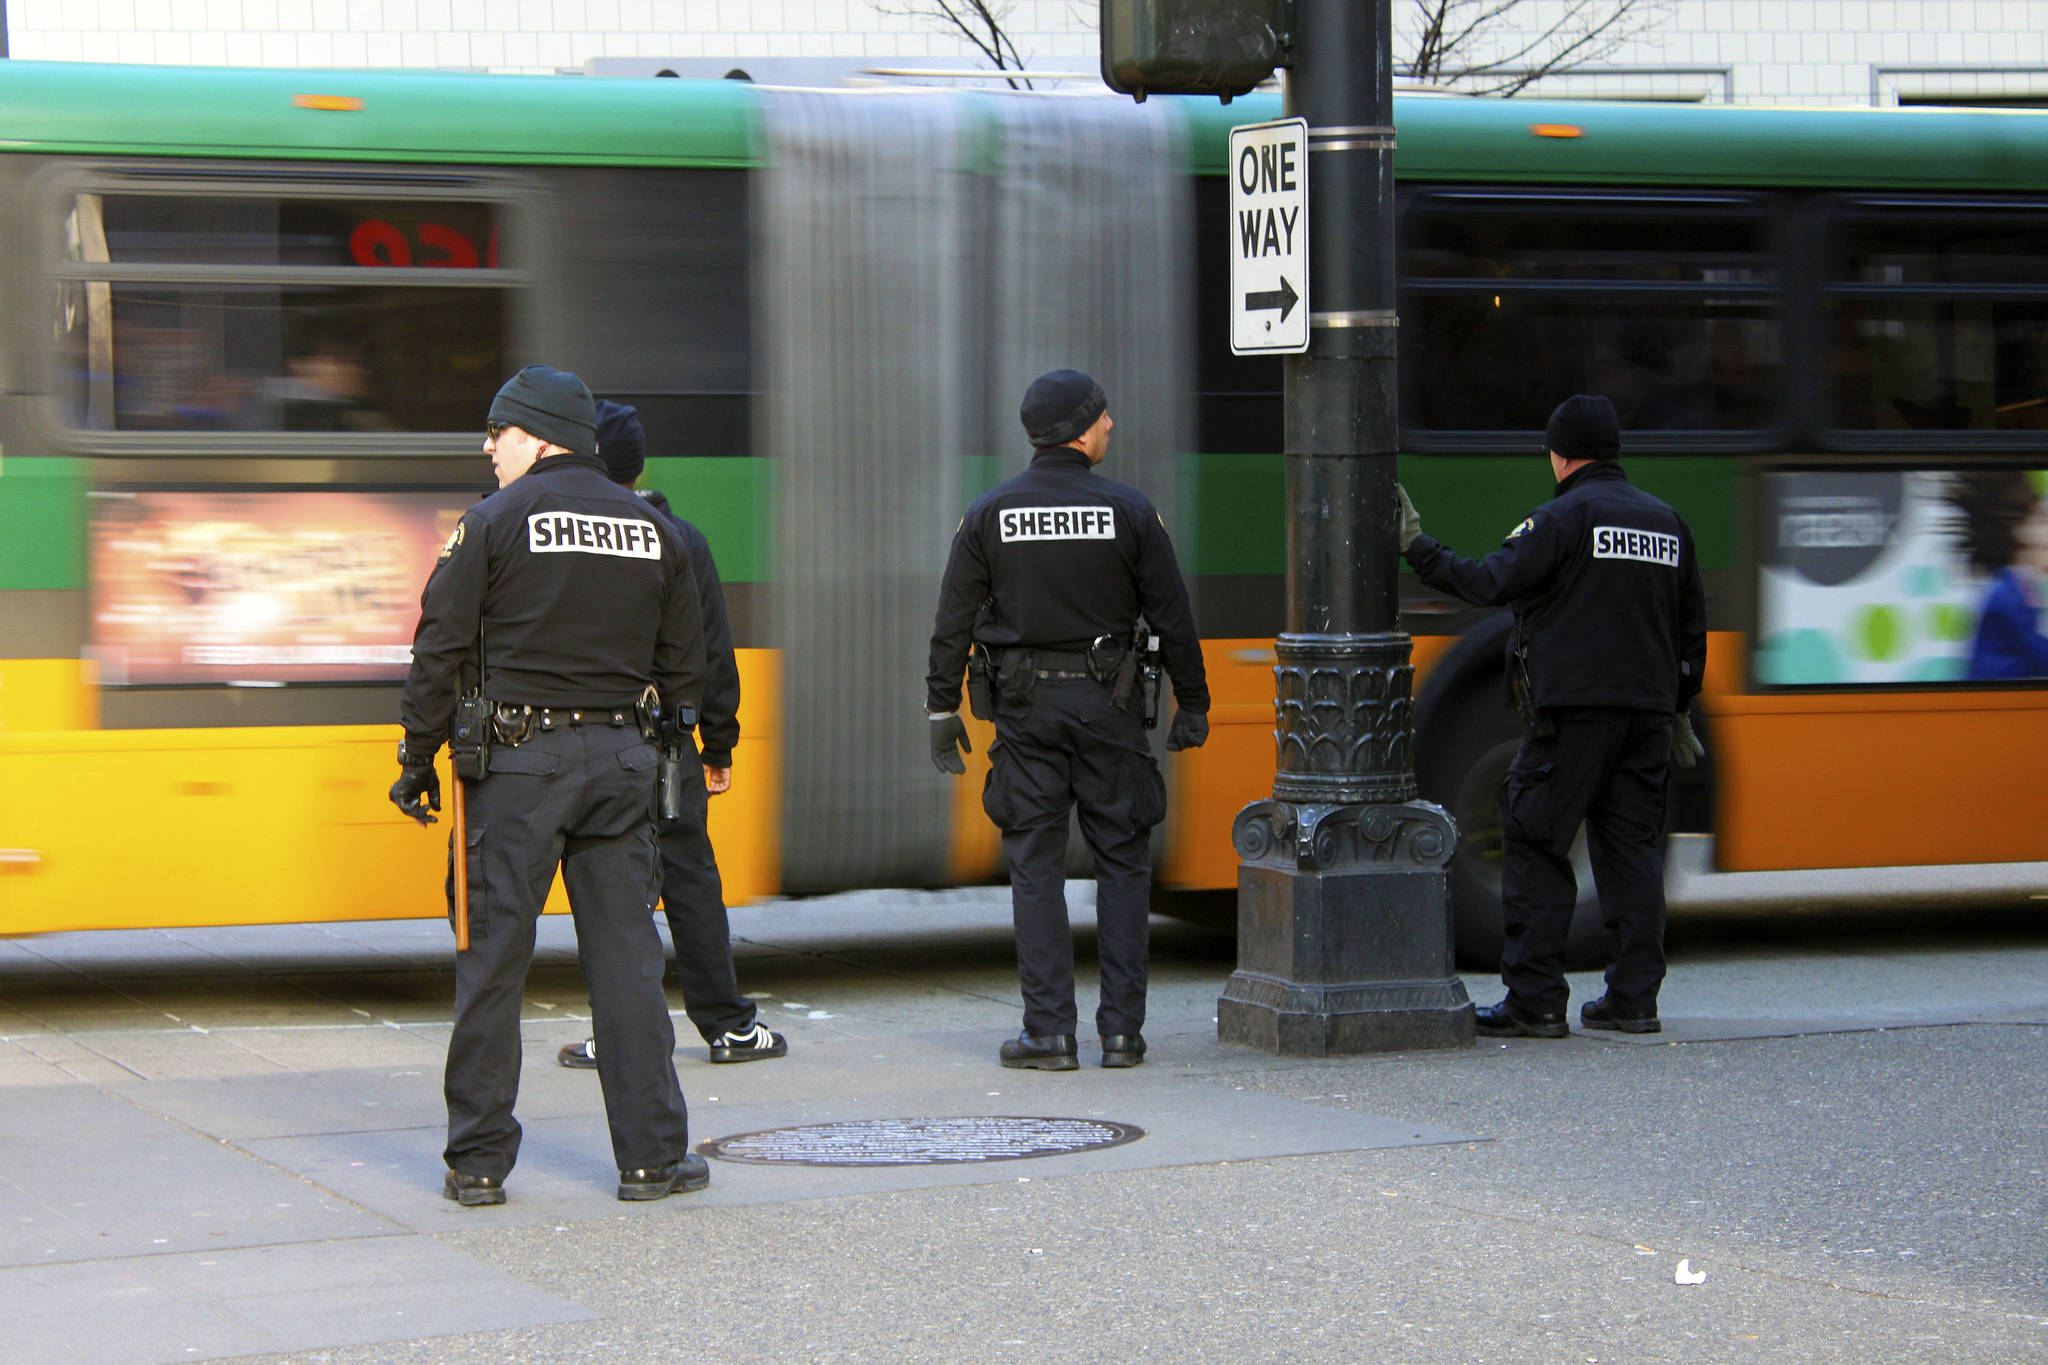 Numerous complaints against King County Sheriff’s deputies for issues like excessive force and improper search and seizure weren’t investigated due to internal misclassification, a new report says. Photo by Oran Viriyincy/Flickr